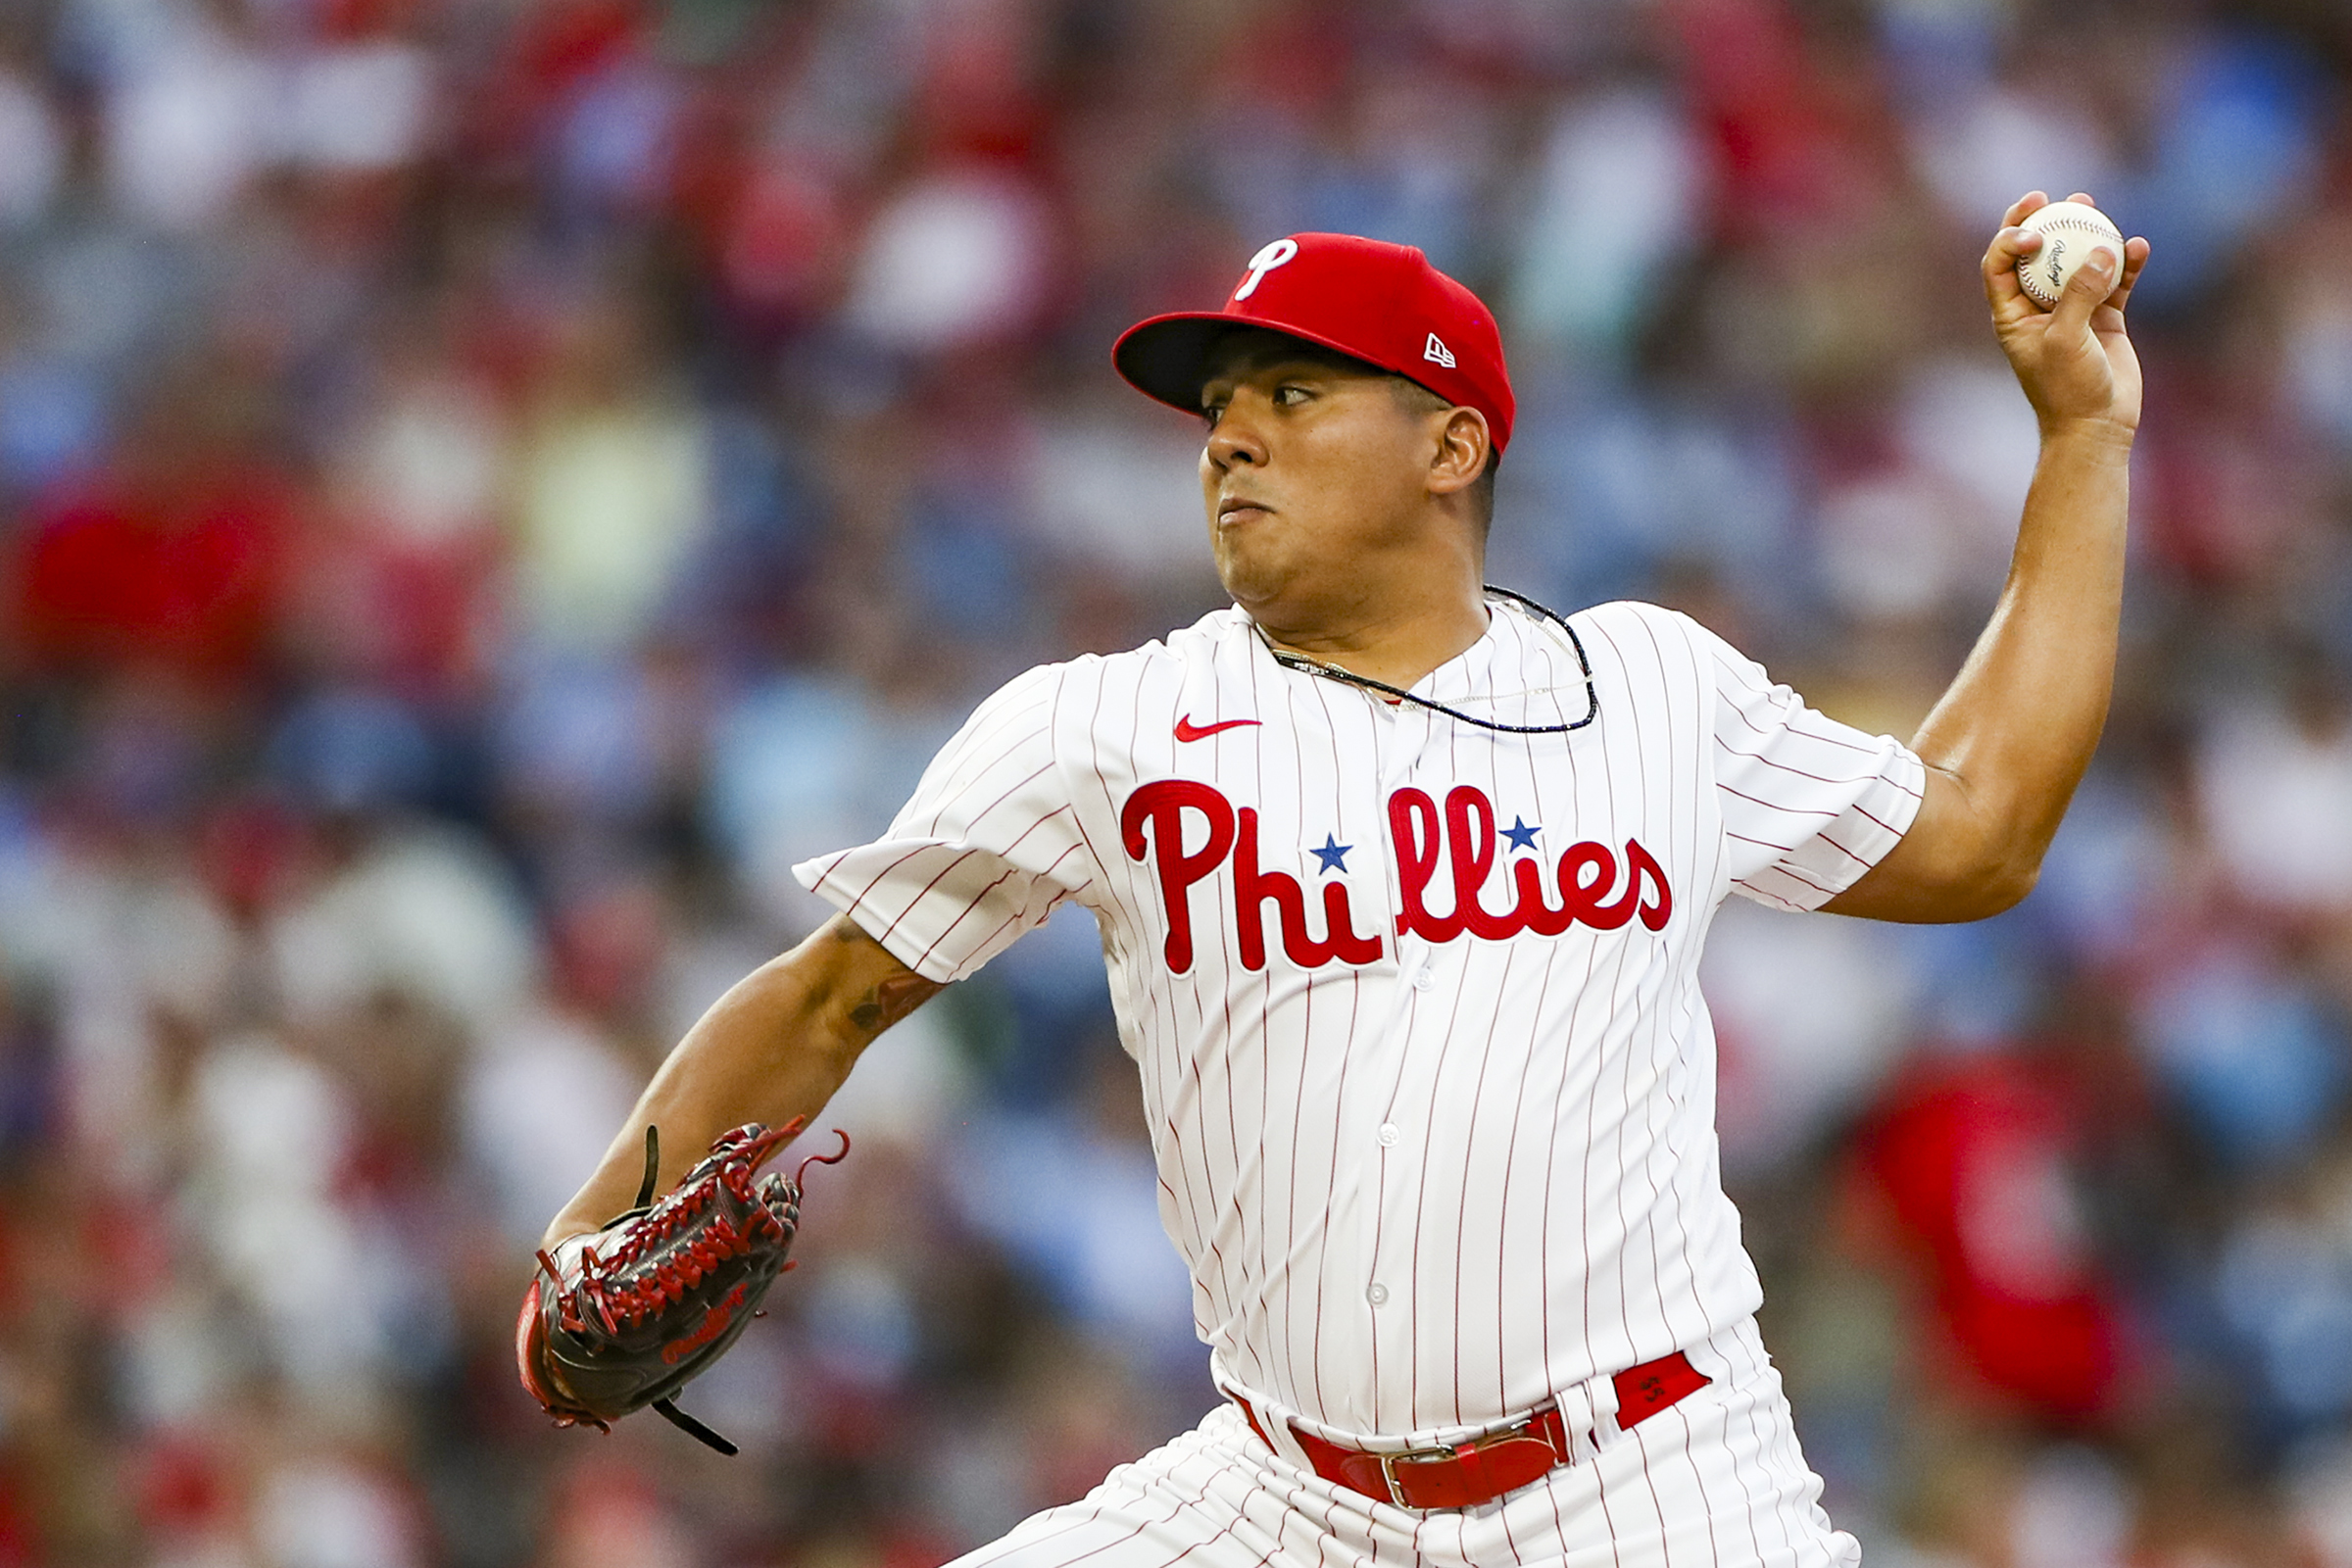 Phillies-Brewers wont air on NBC Sports Philadelphia this weekend